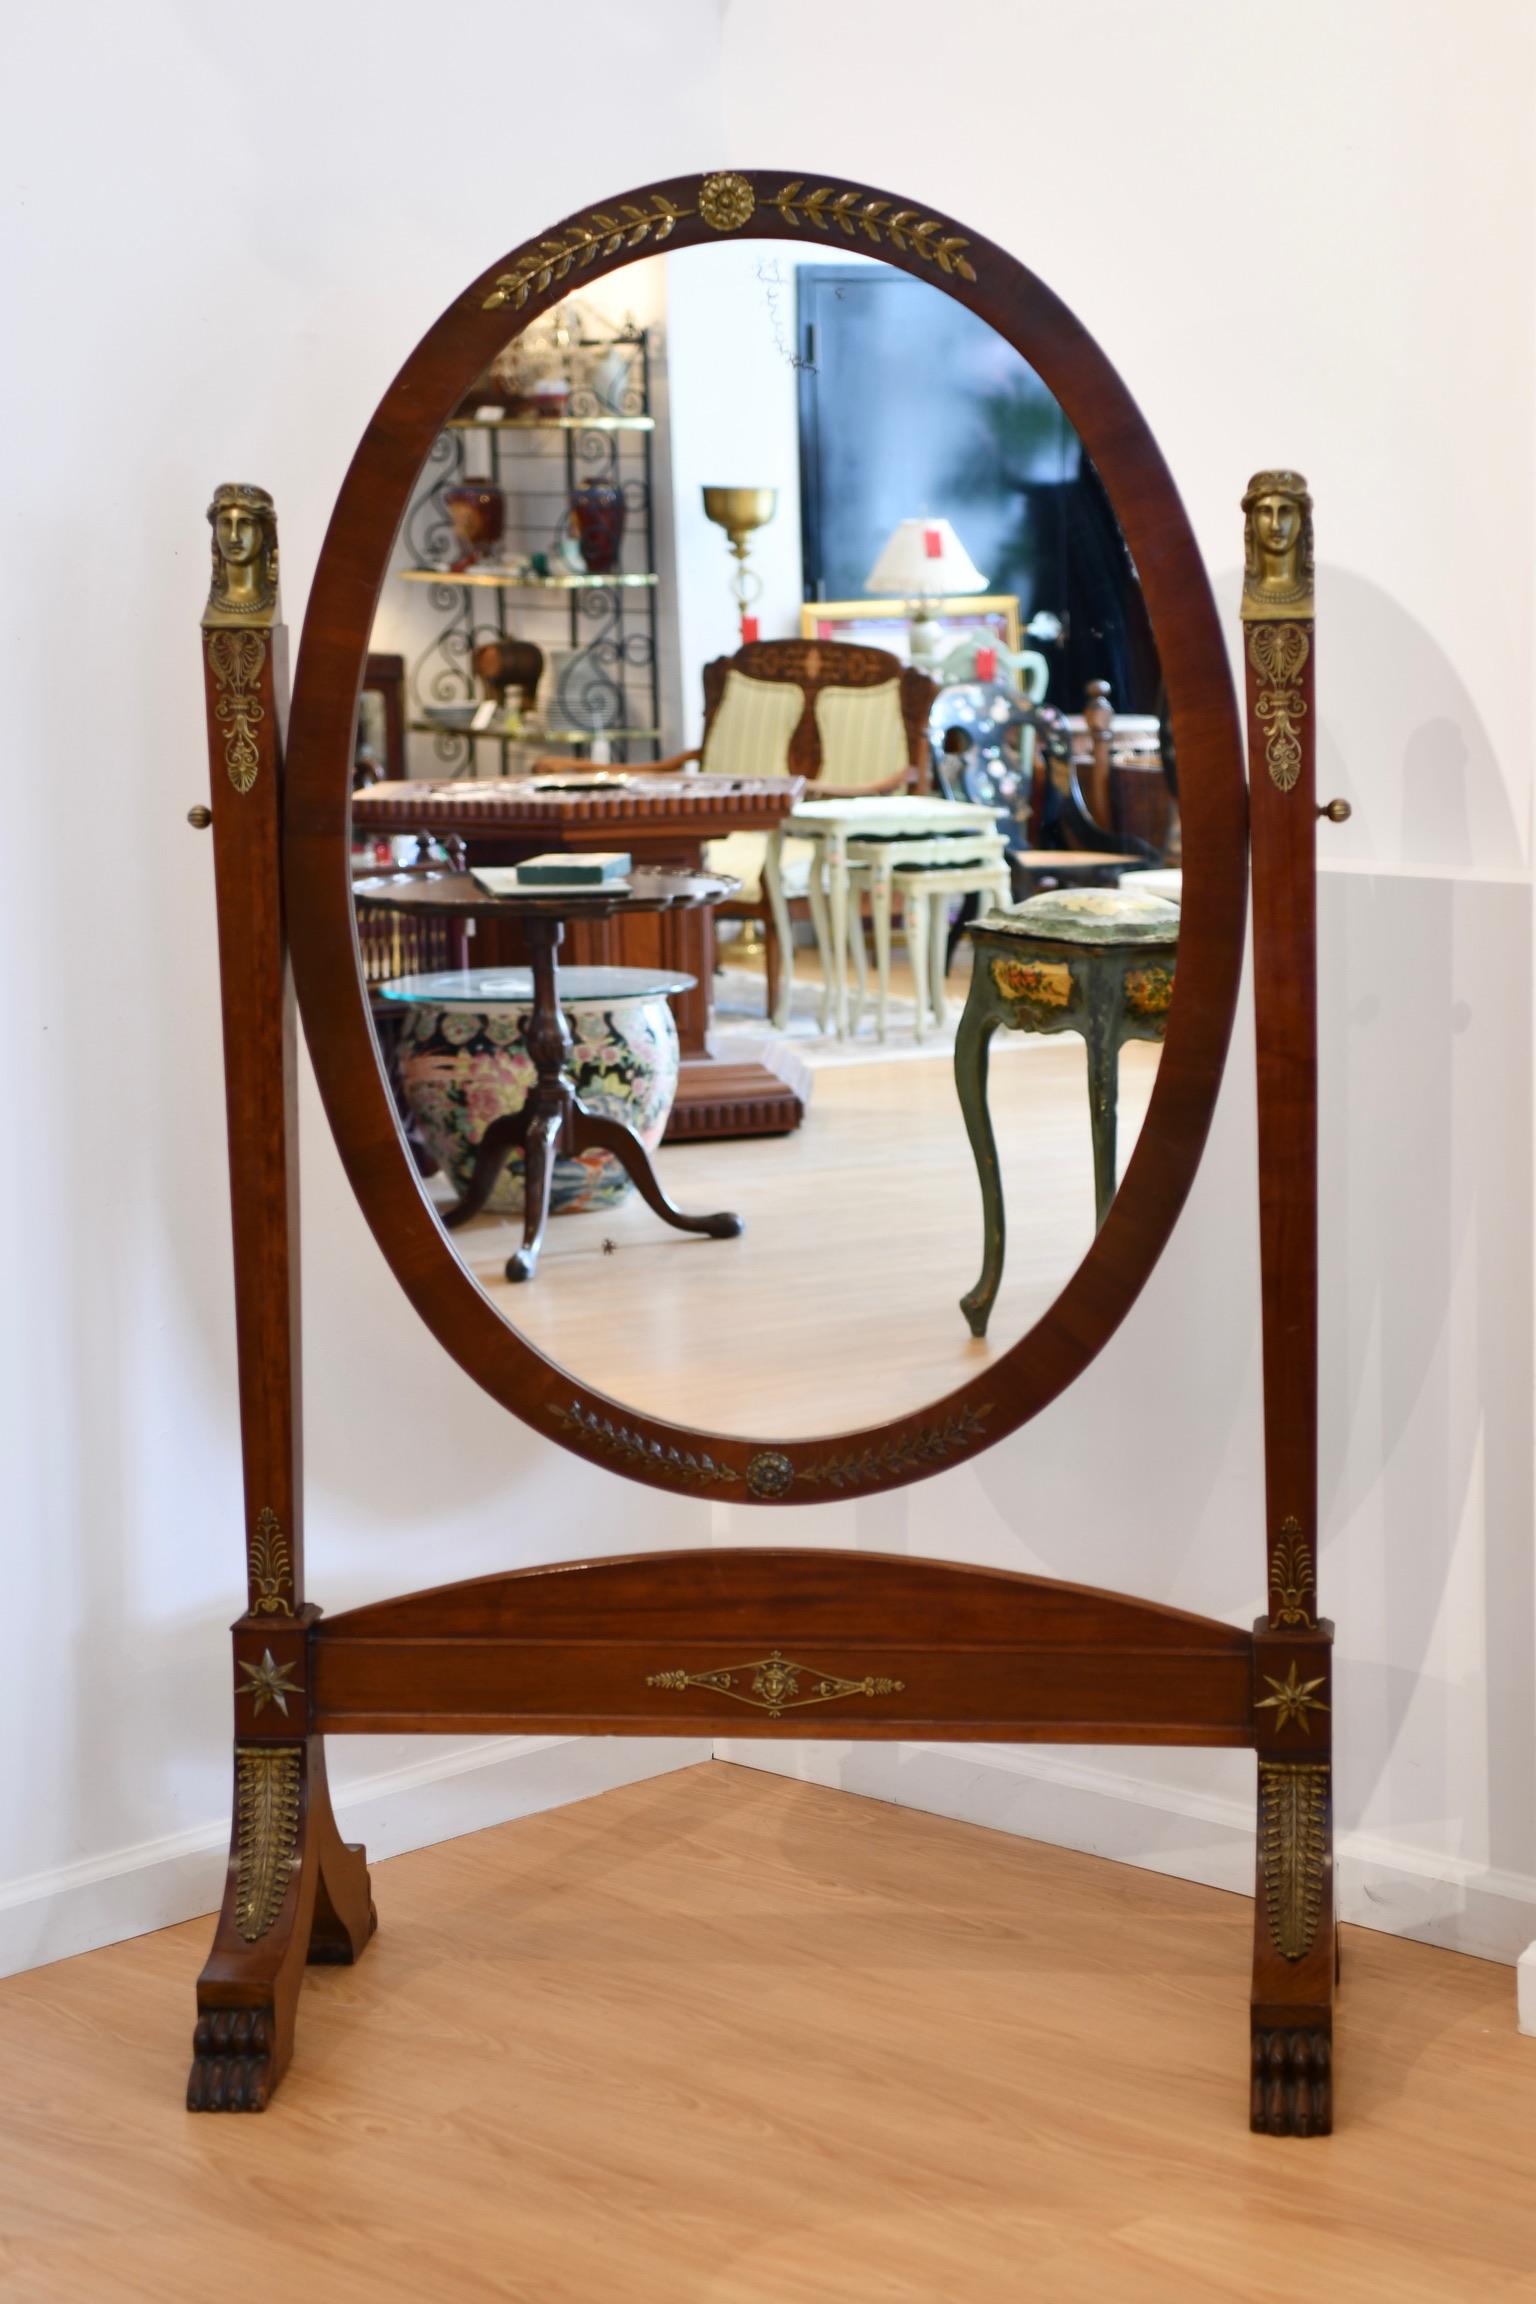 Antique French Empire style cheval mirror with claw feet and figural bronze accents, circa 1900. Repairs at one joint; some minor speckling to mirror glass. Dimensions: 65.5